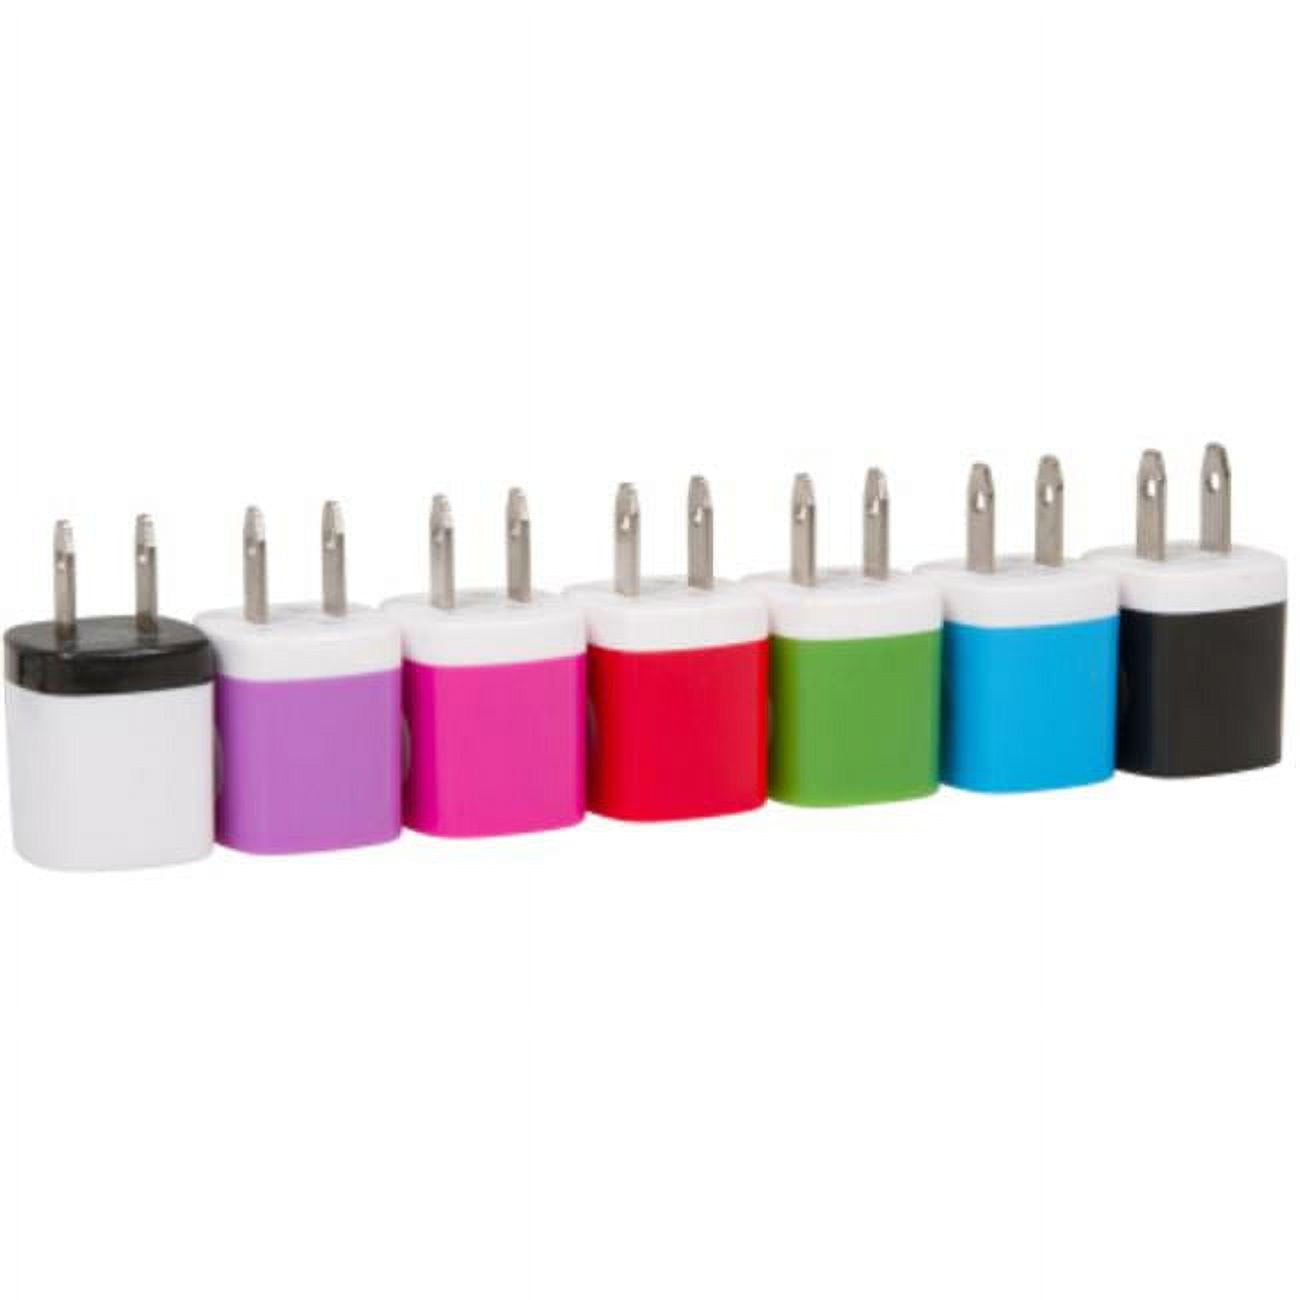 Picture of Get Power 3861614 Assorted Color USB to AC Home Adapter - Case of 30